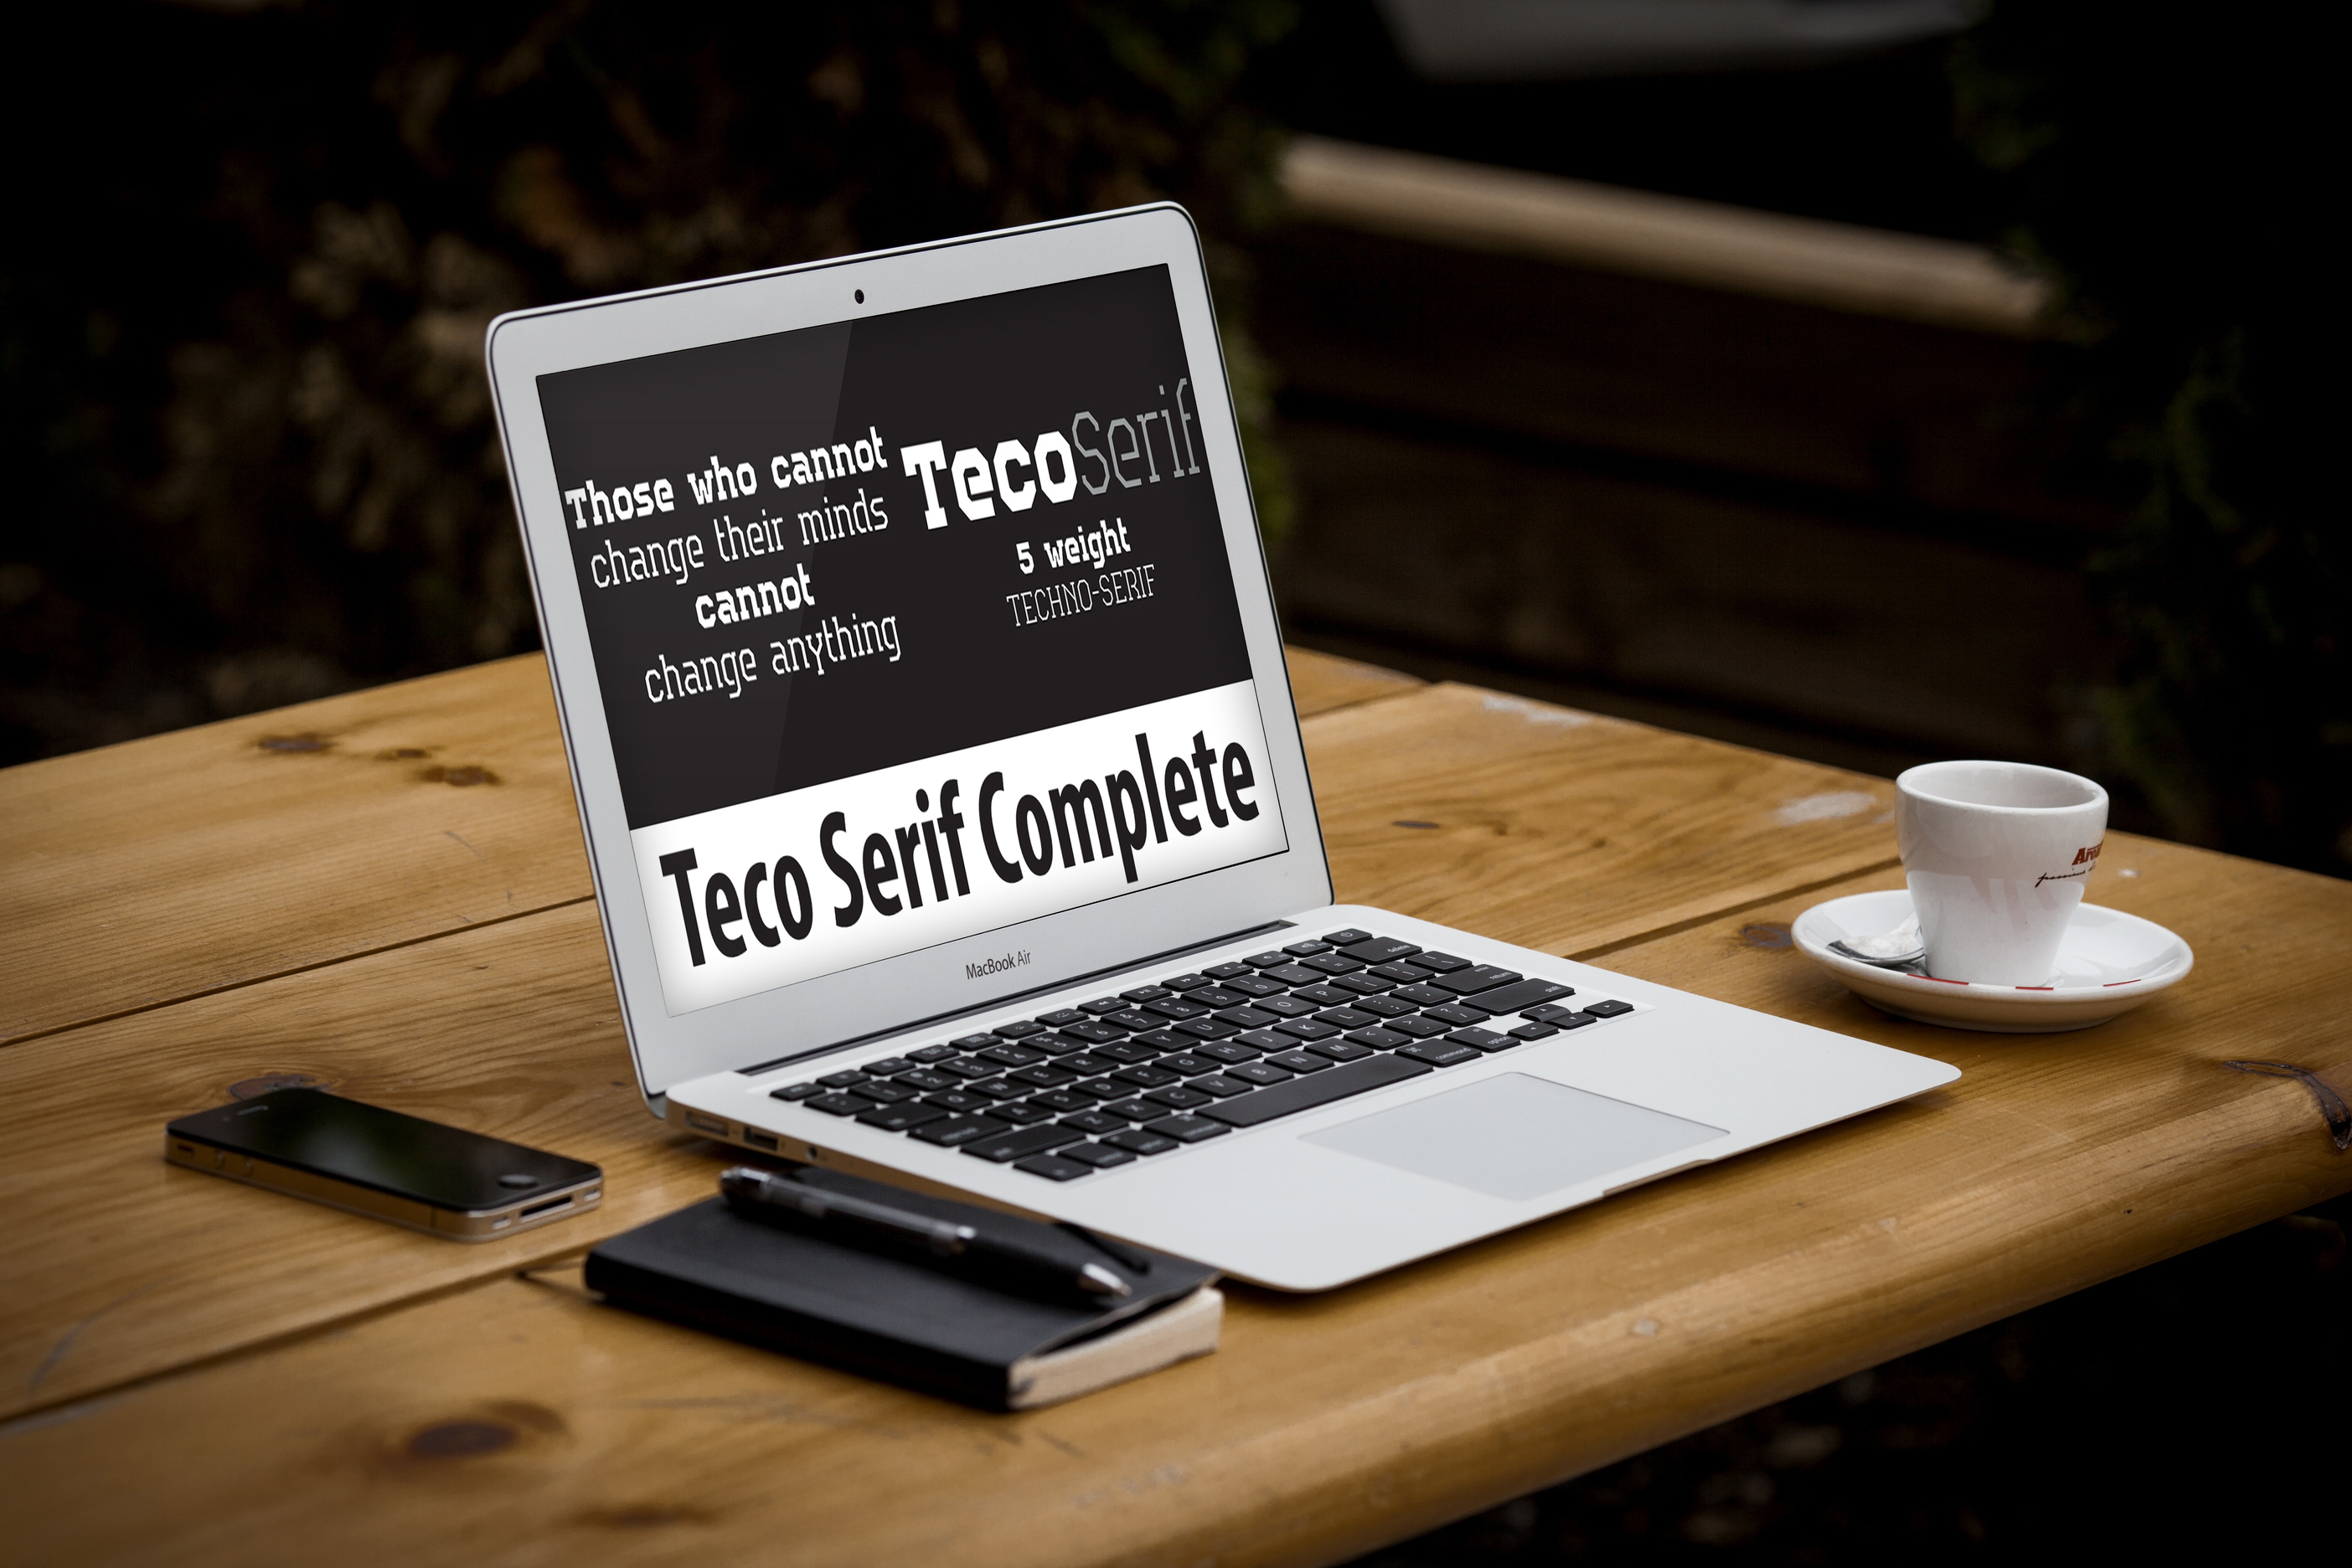 Tablet option of the Teco Serif Complete.